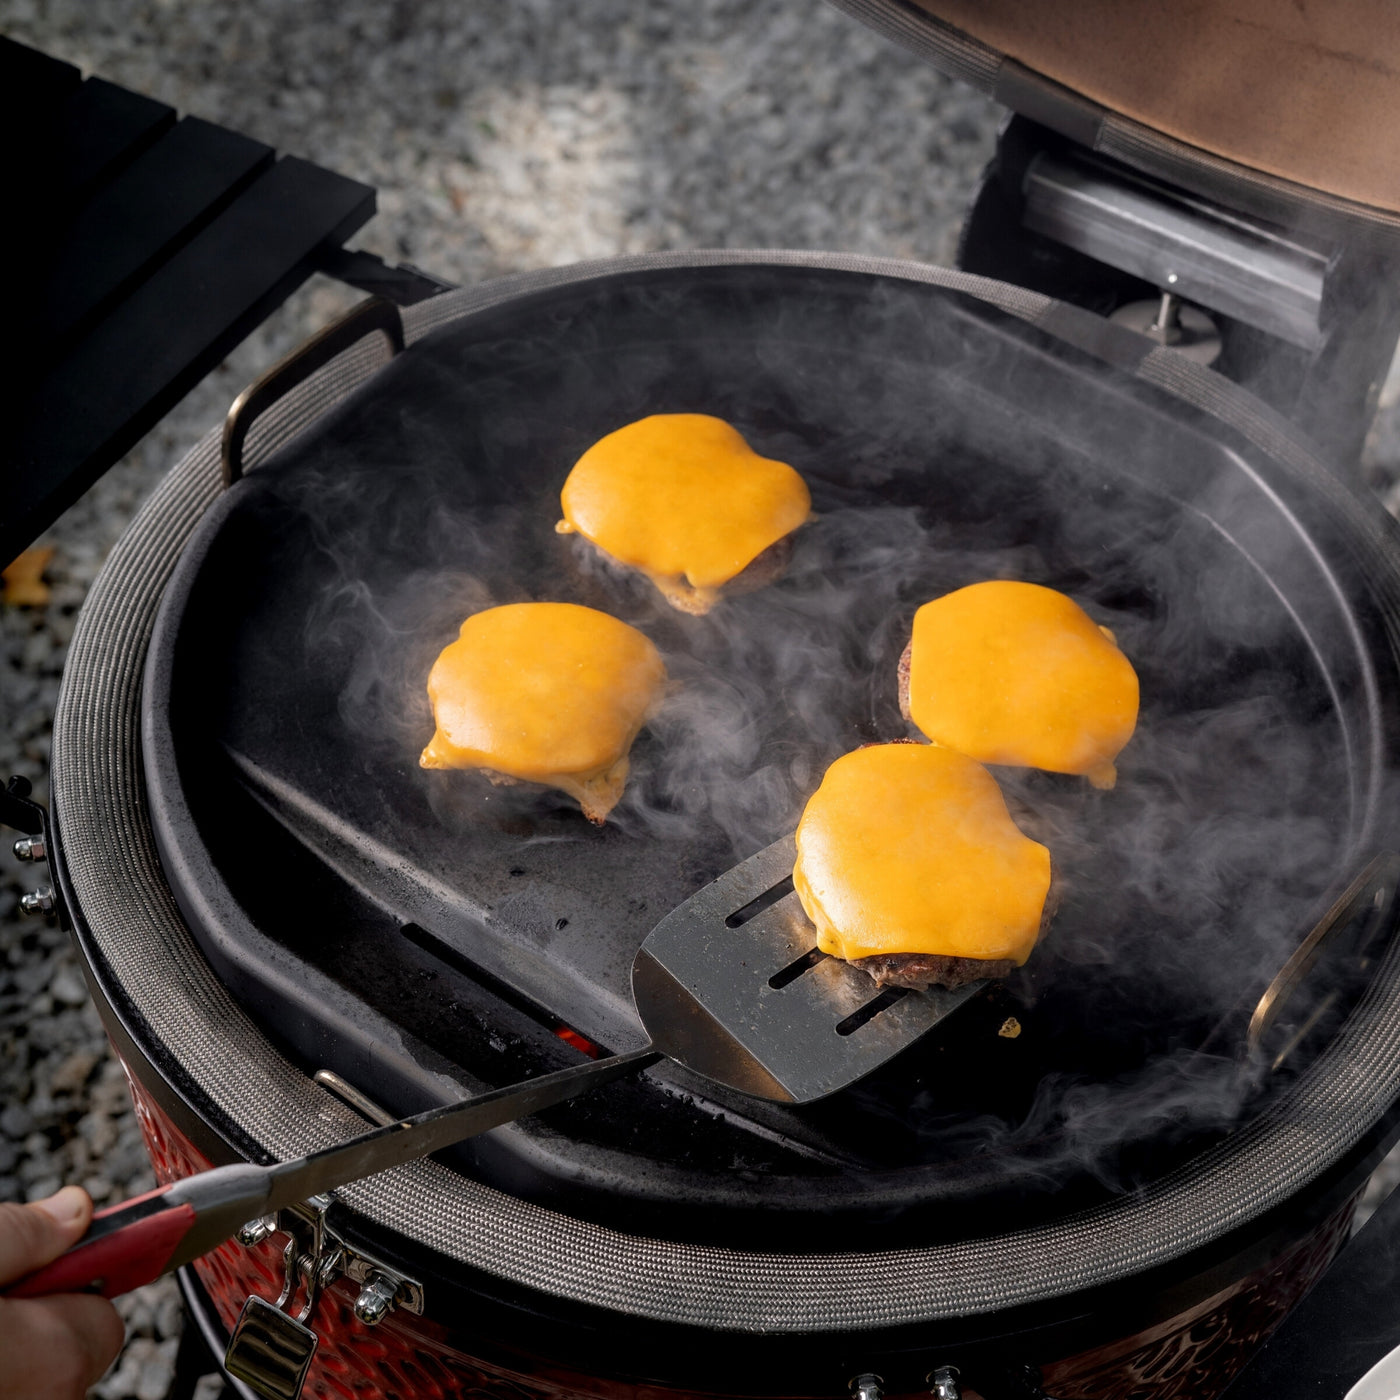 WAREHOUSE CLEARANCE: Kamado Joe Karbon Steel Griddle. Now with 10% OFF. From £152.100